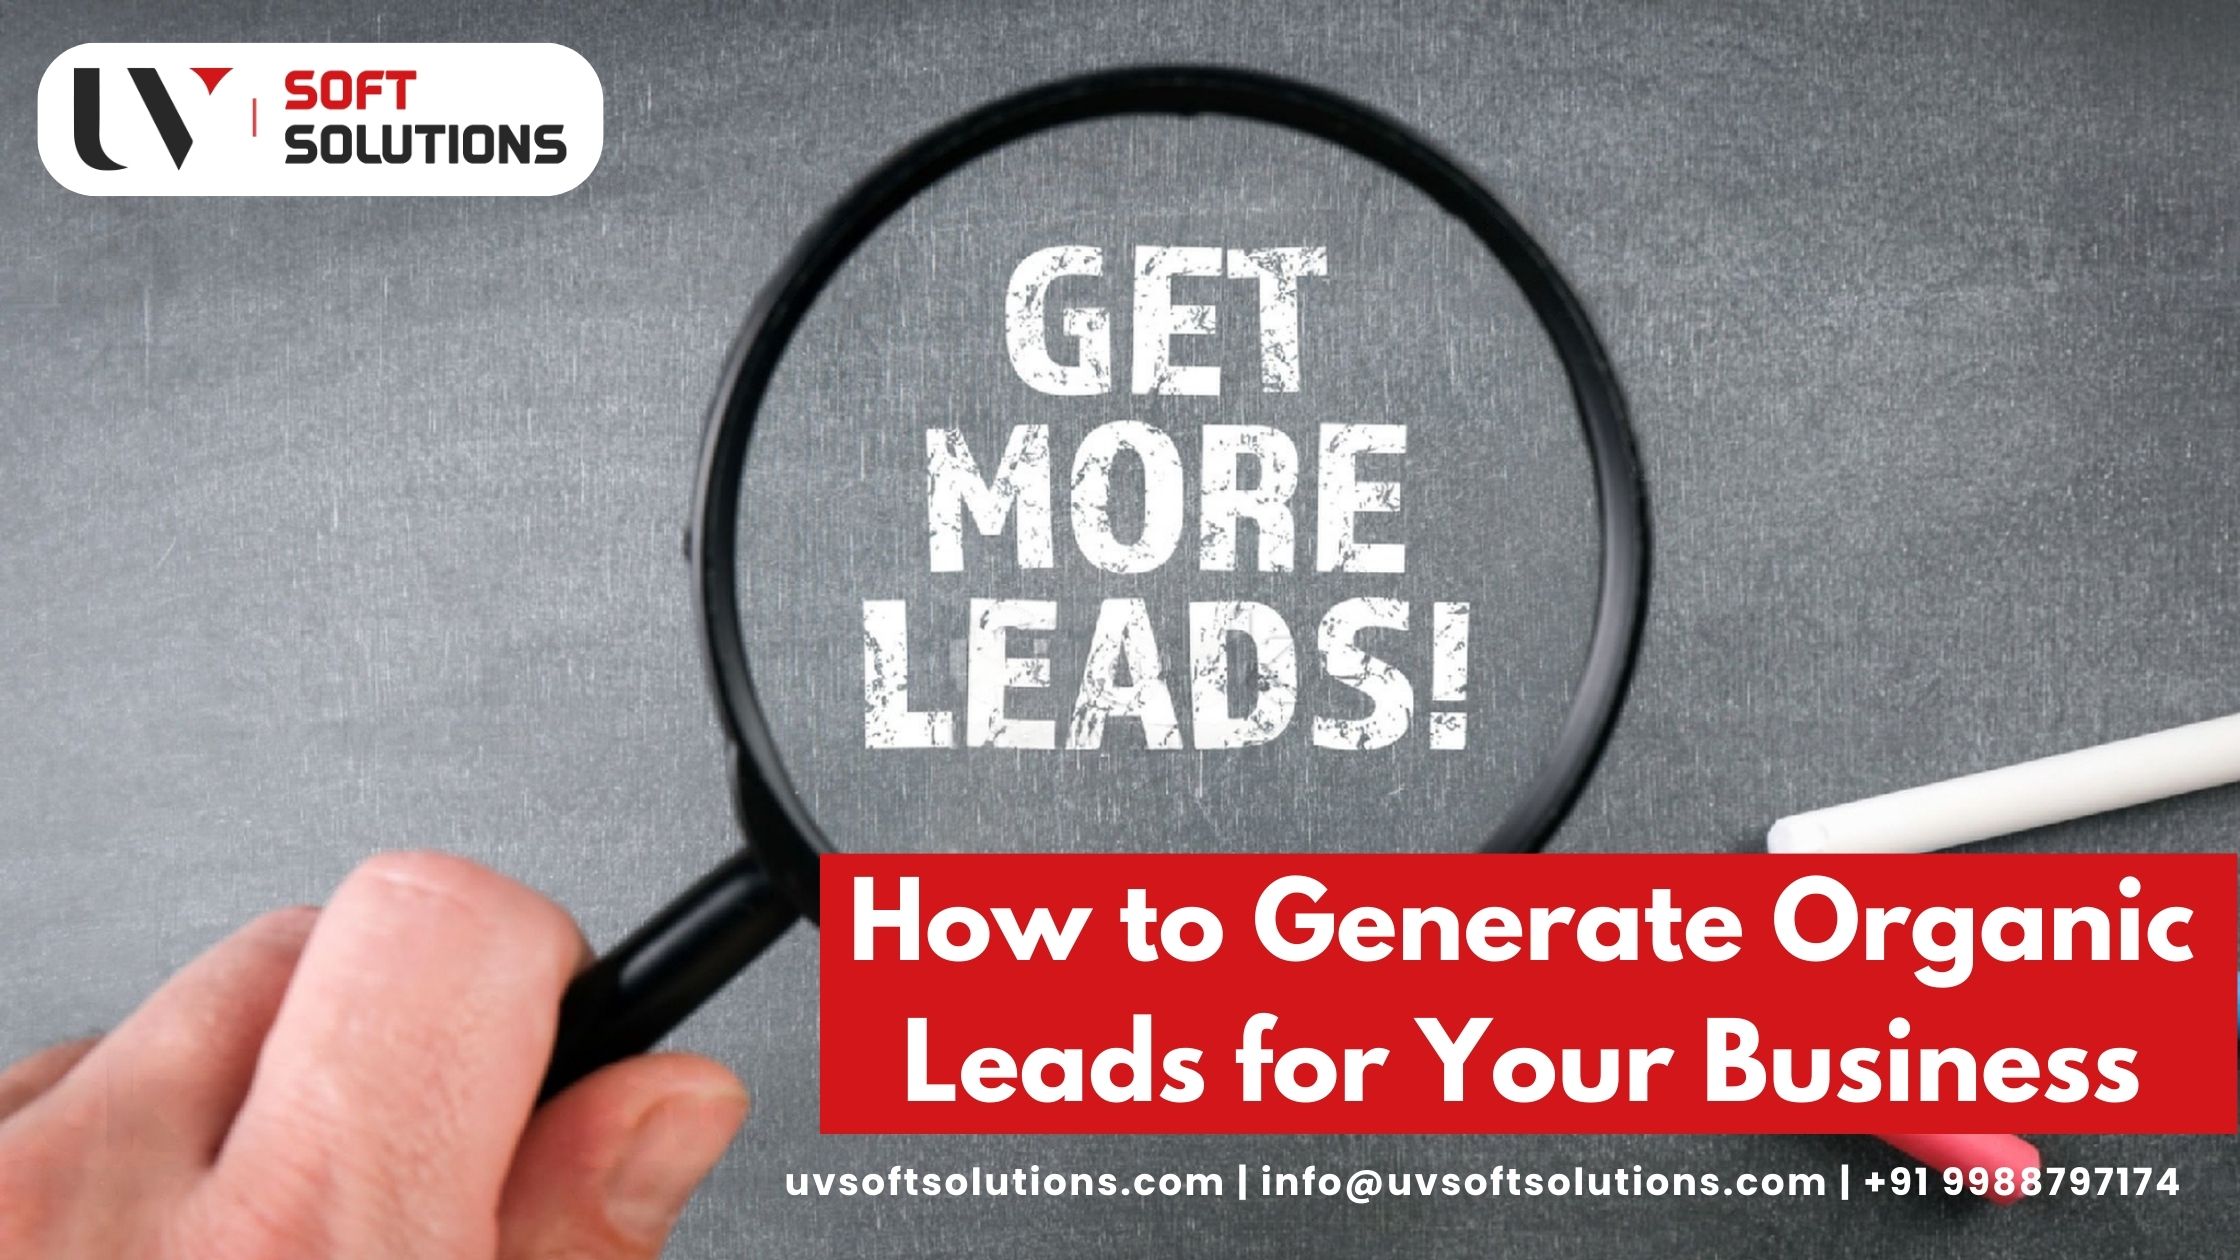 How to Generate Organic Leads for Your Business